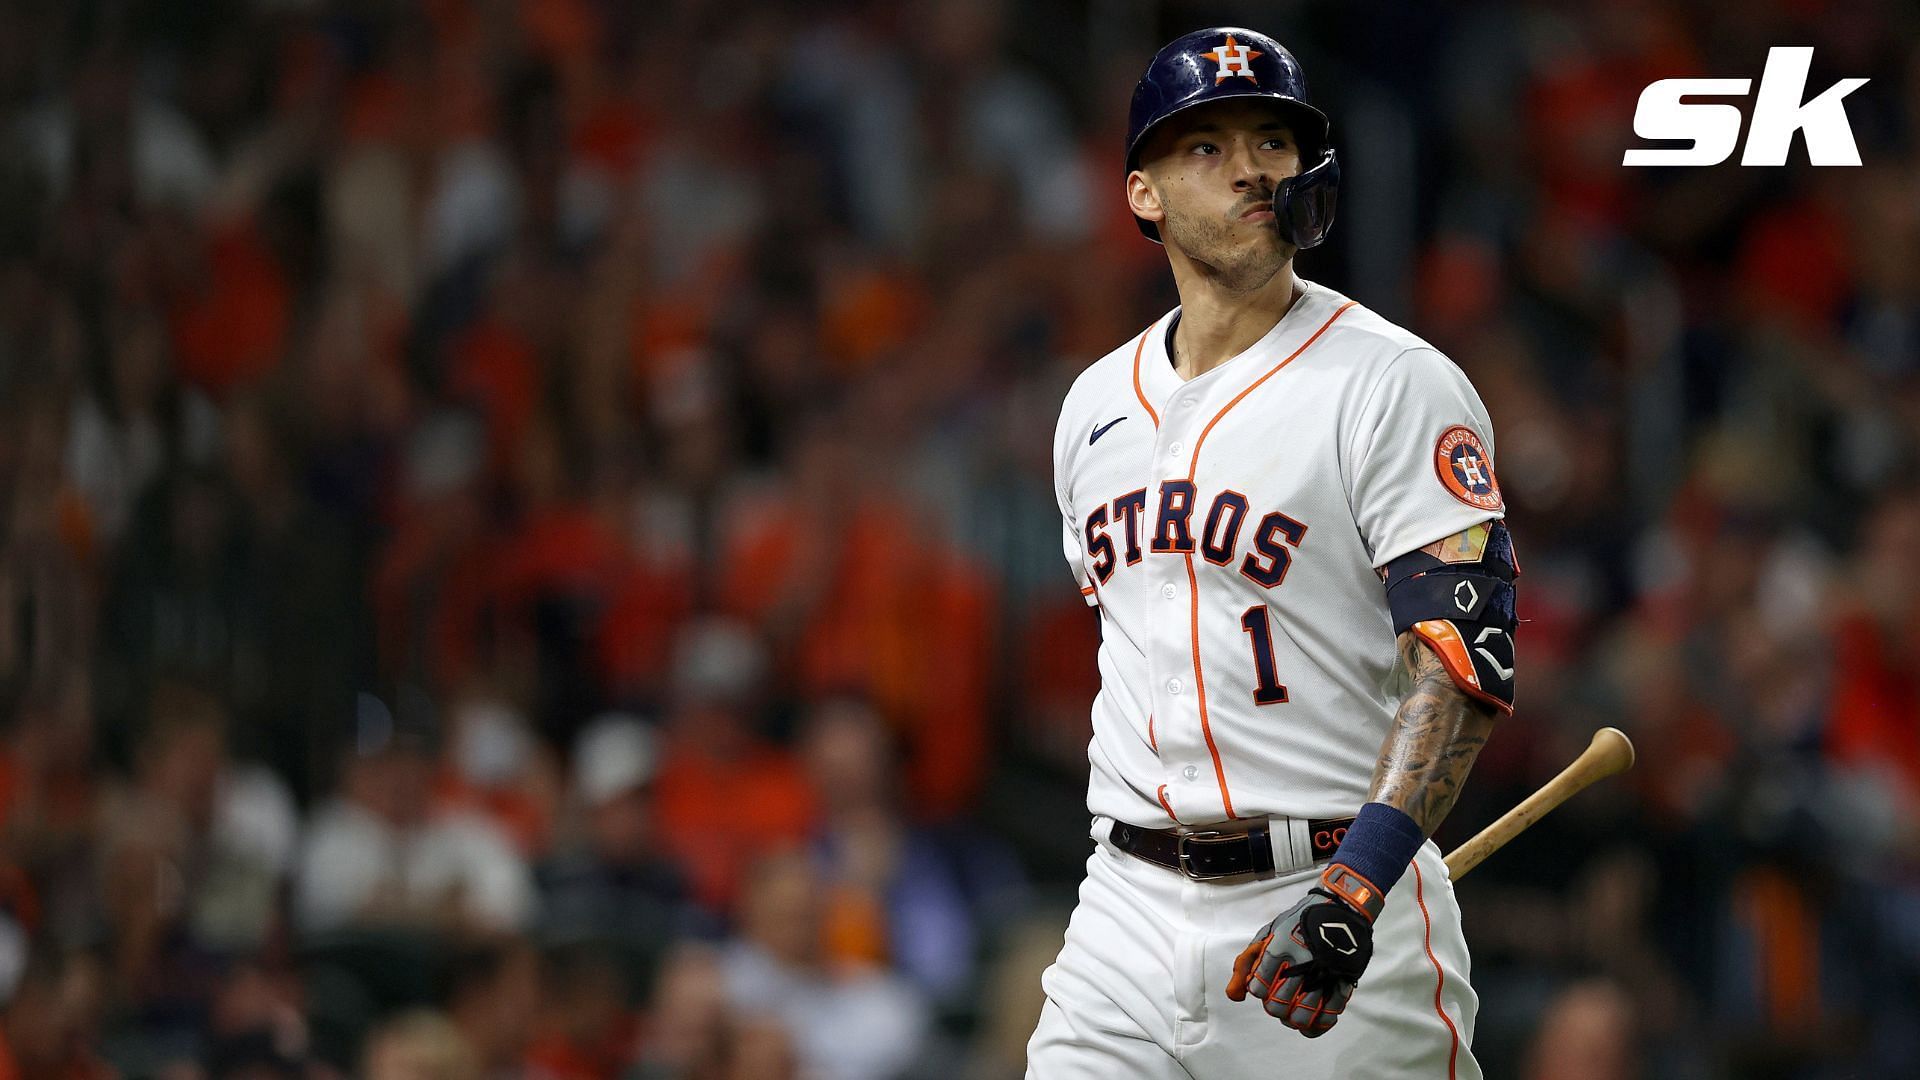 The Pen: How Astros fans feel about the sign-stealing scandal rocking MLB